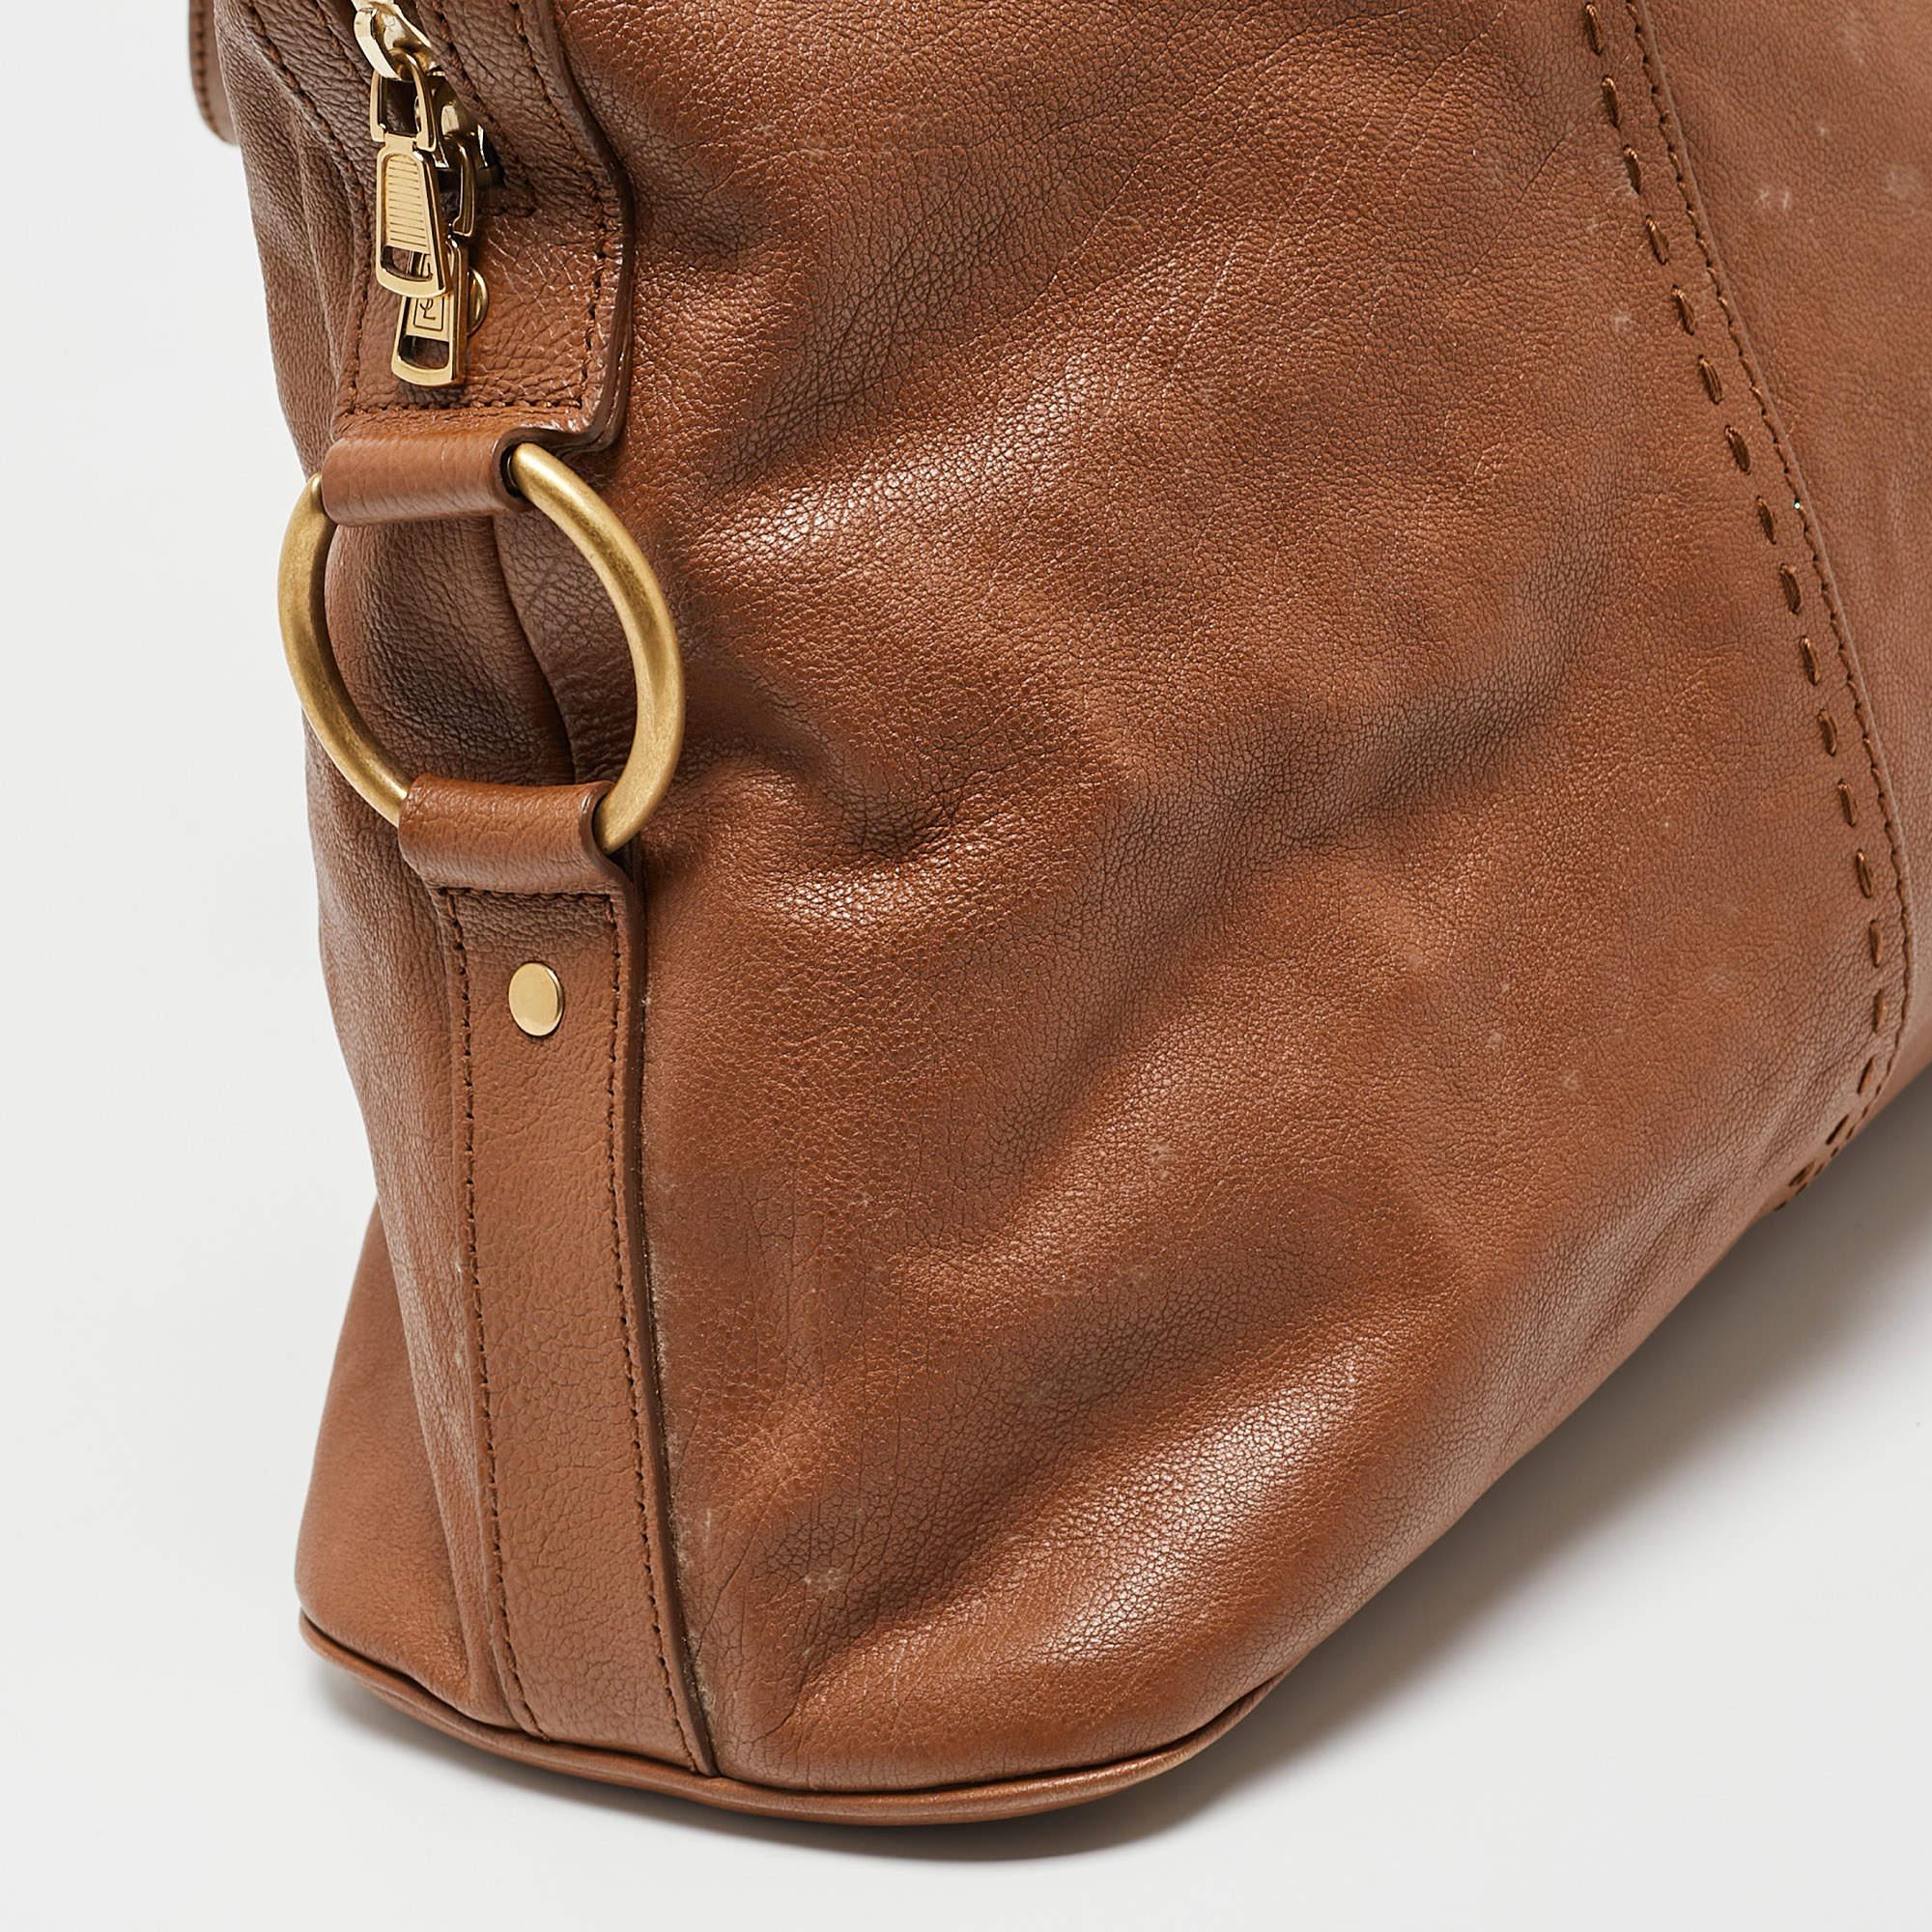 Yves Saint Laurent Brown Leather Oversized Muse Bag 4